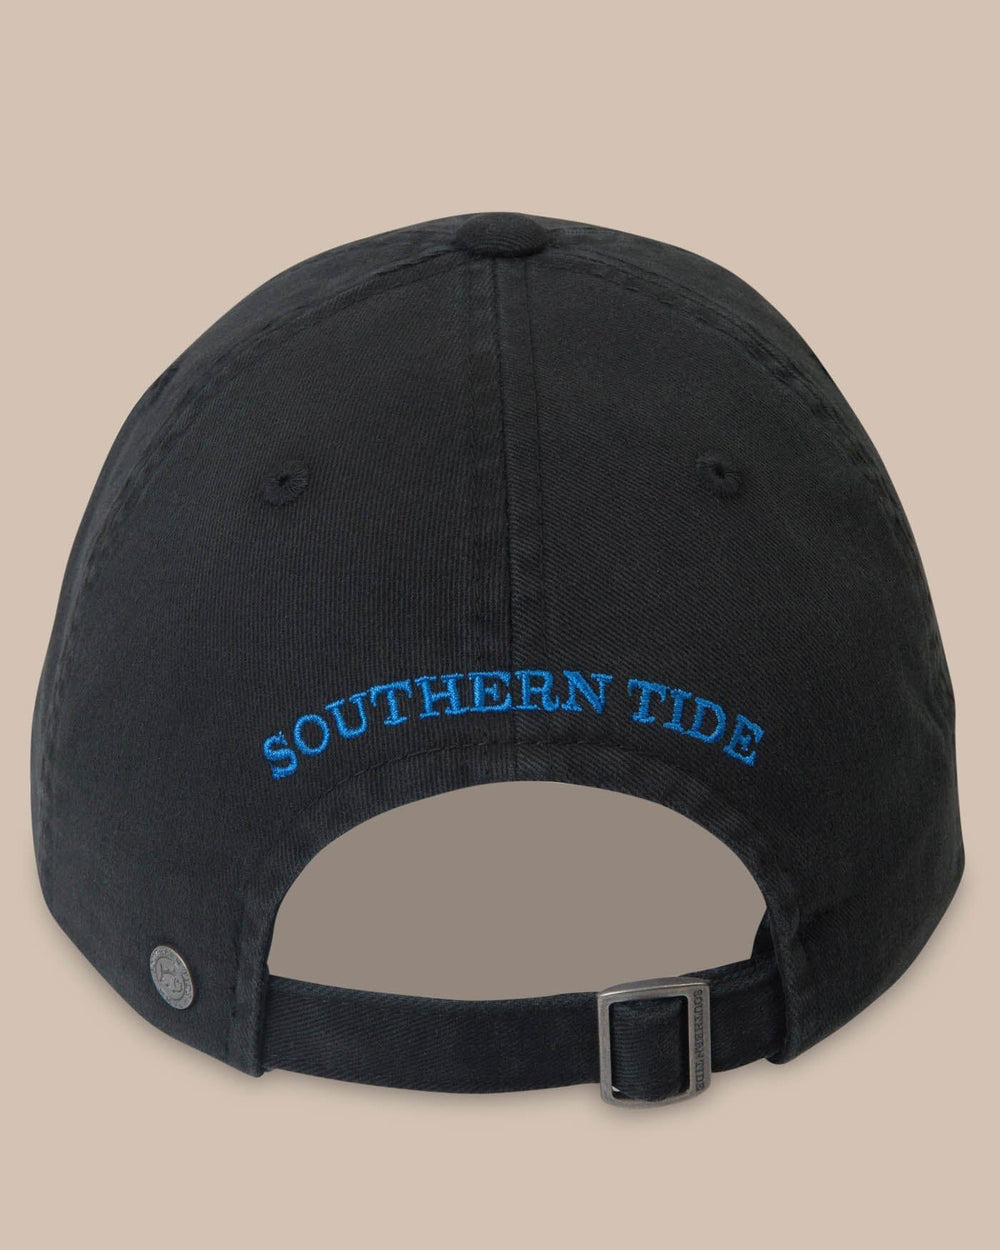 The back of the Skipjack Hat by Southern Tide - Black